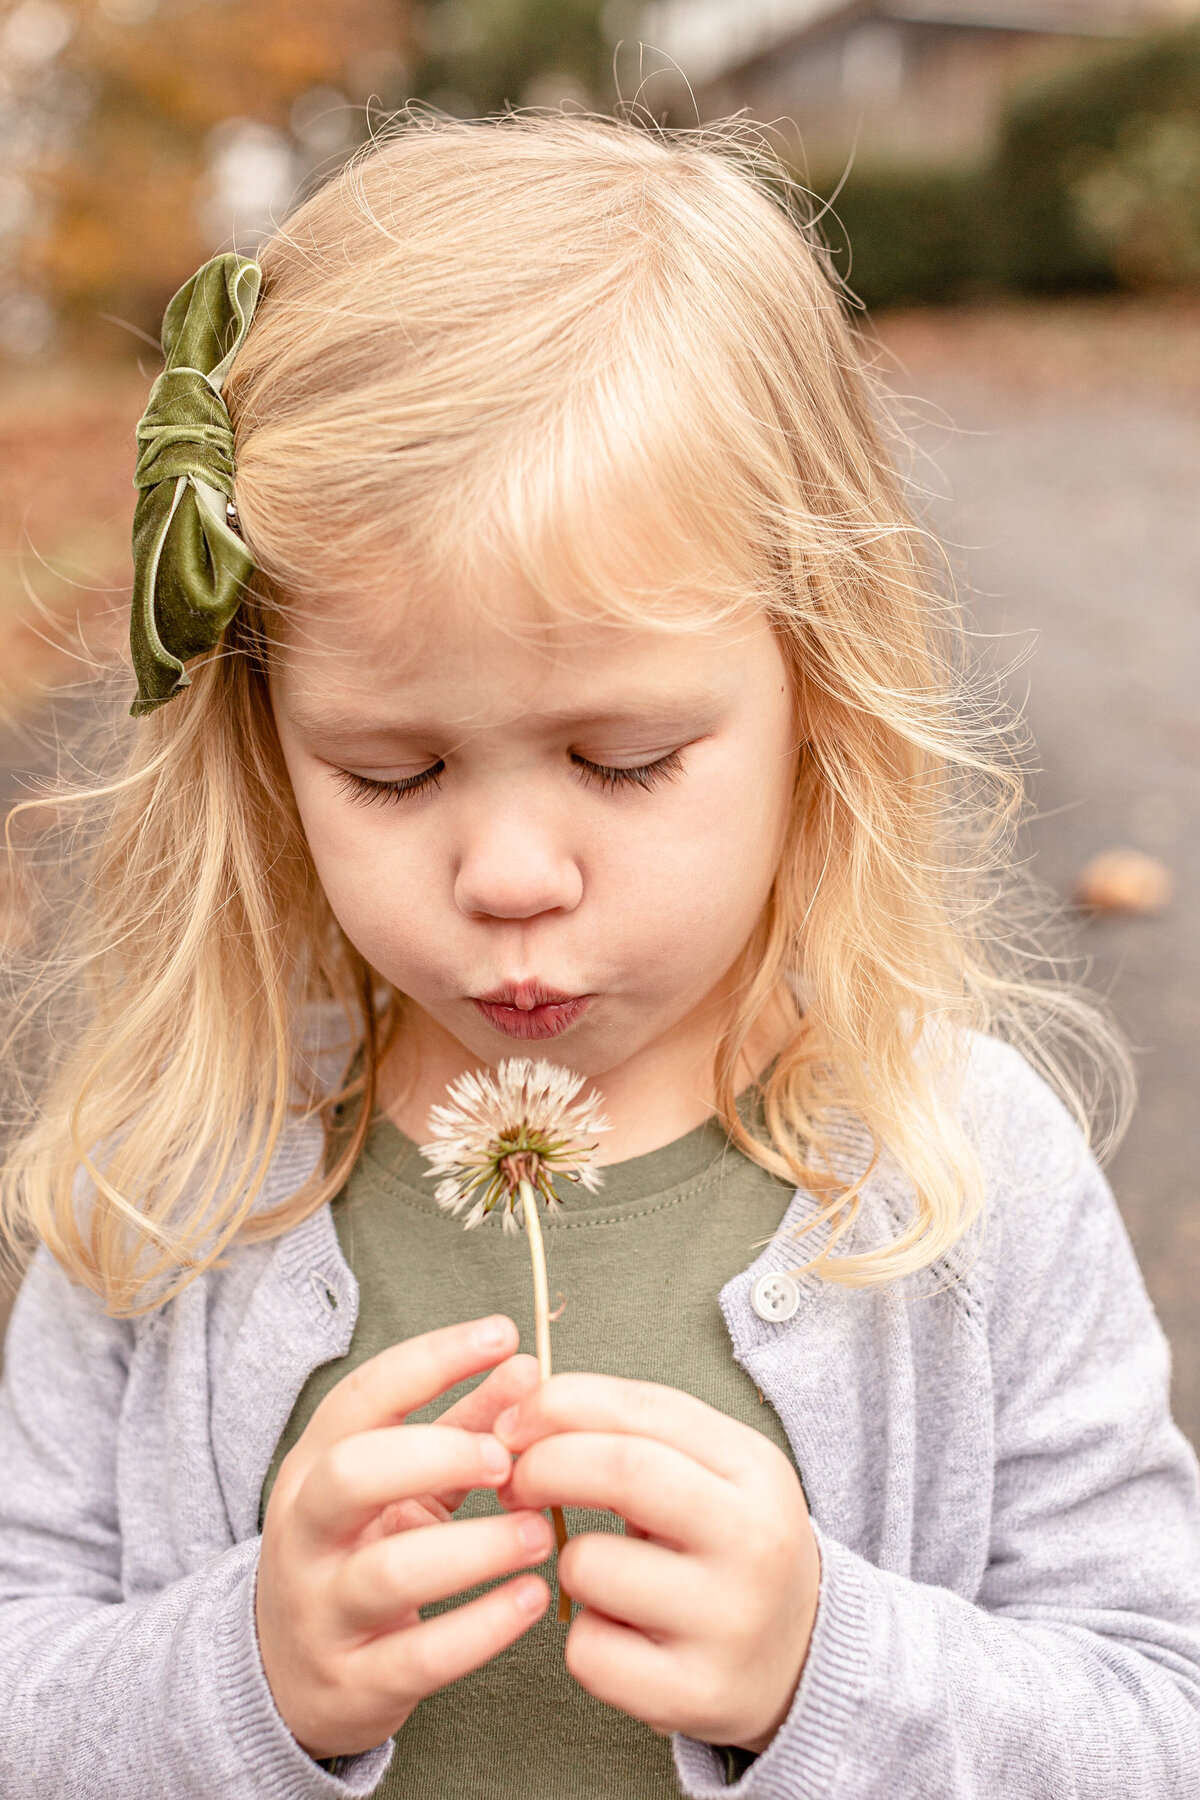 Little girl with blonde hair looking down at a dandelion seed pod and blowing on it. Outdoor family photos in Portland, Oregon.